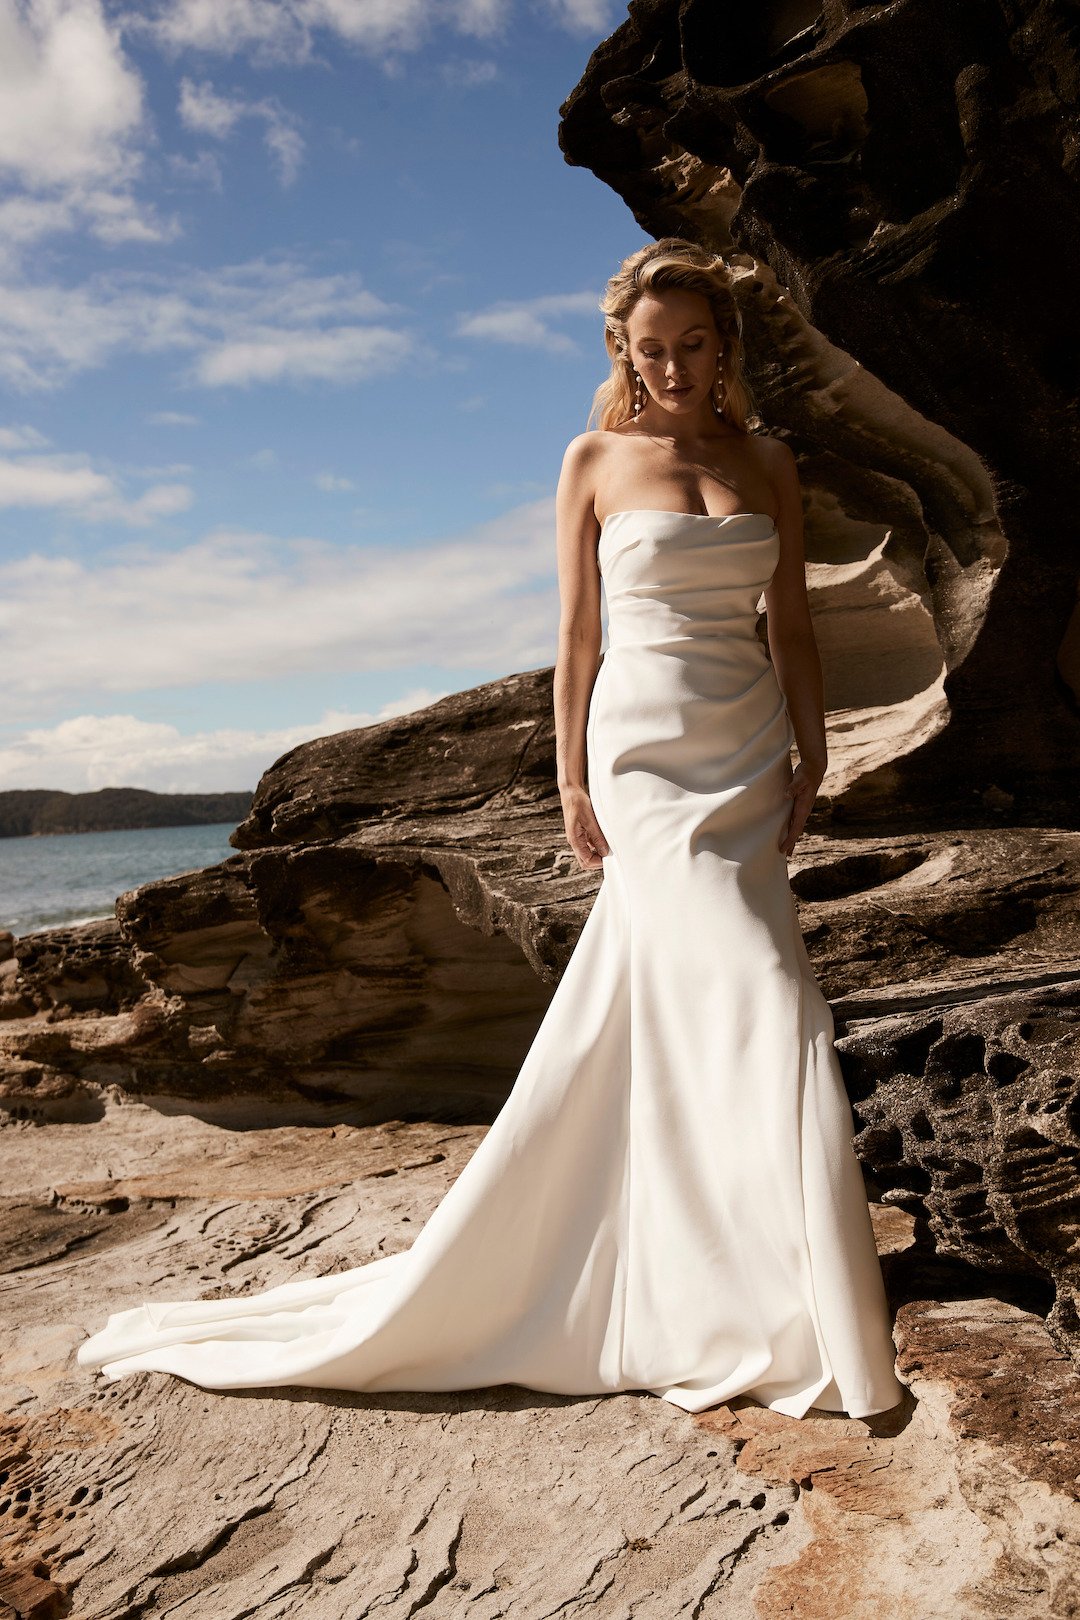 A-line Illusion Overlay on 'The Adelite' Wedding Gown with Draped Neckline - Edited.jpg